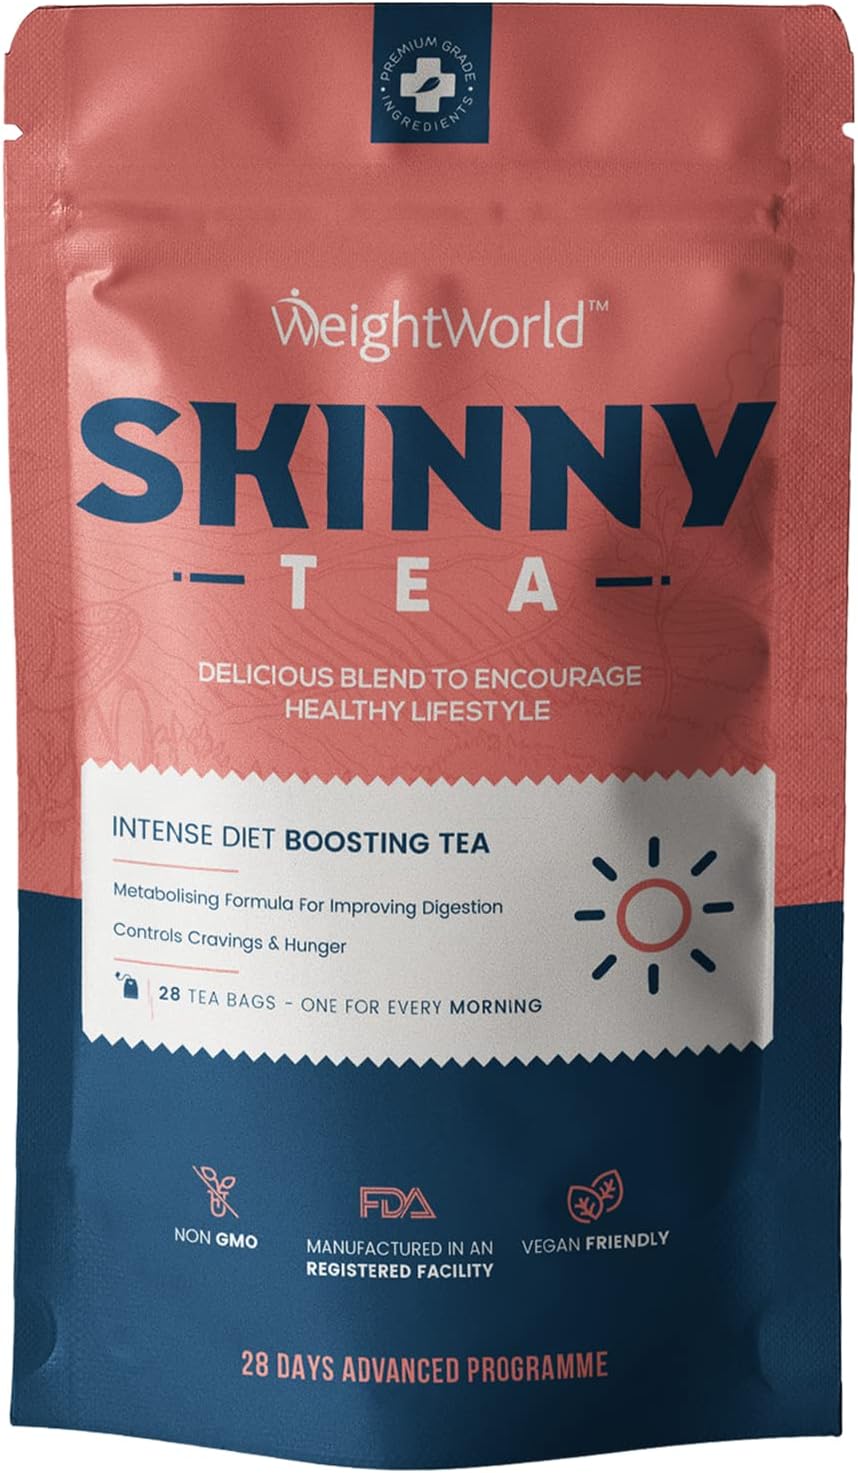 Weightworld Skinny Tea 28 Day Diet Cleanse Morning Tea RRP £9.99 CLEARANCE XL £6.99